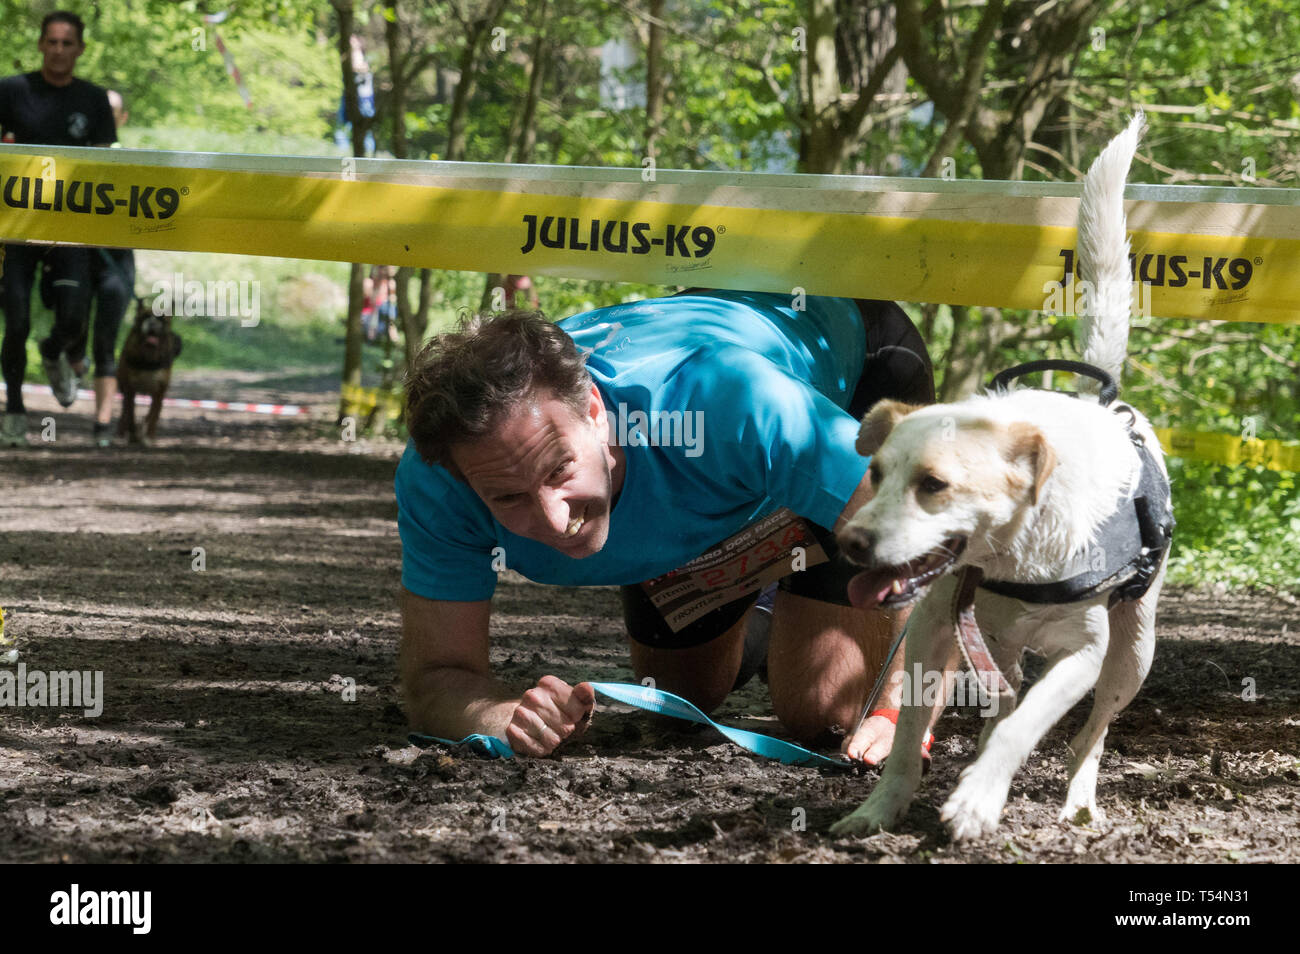 Nagymaros, Hungary. 20th Apr, 2019. Participants compete in the Hard Dog Race extreme obstacle course race near Nagymaros, Hungary on April 20, 2019. Credit: Xinhua/Alamy Live News Stock Photo